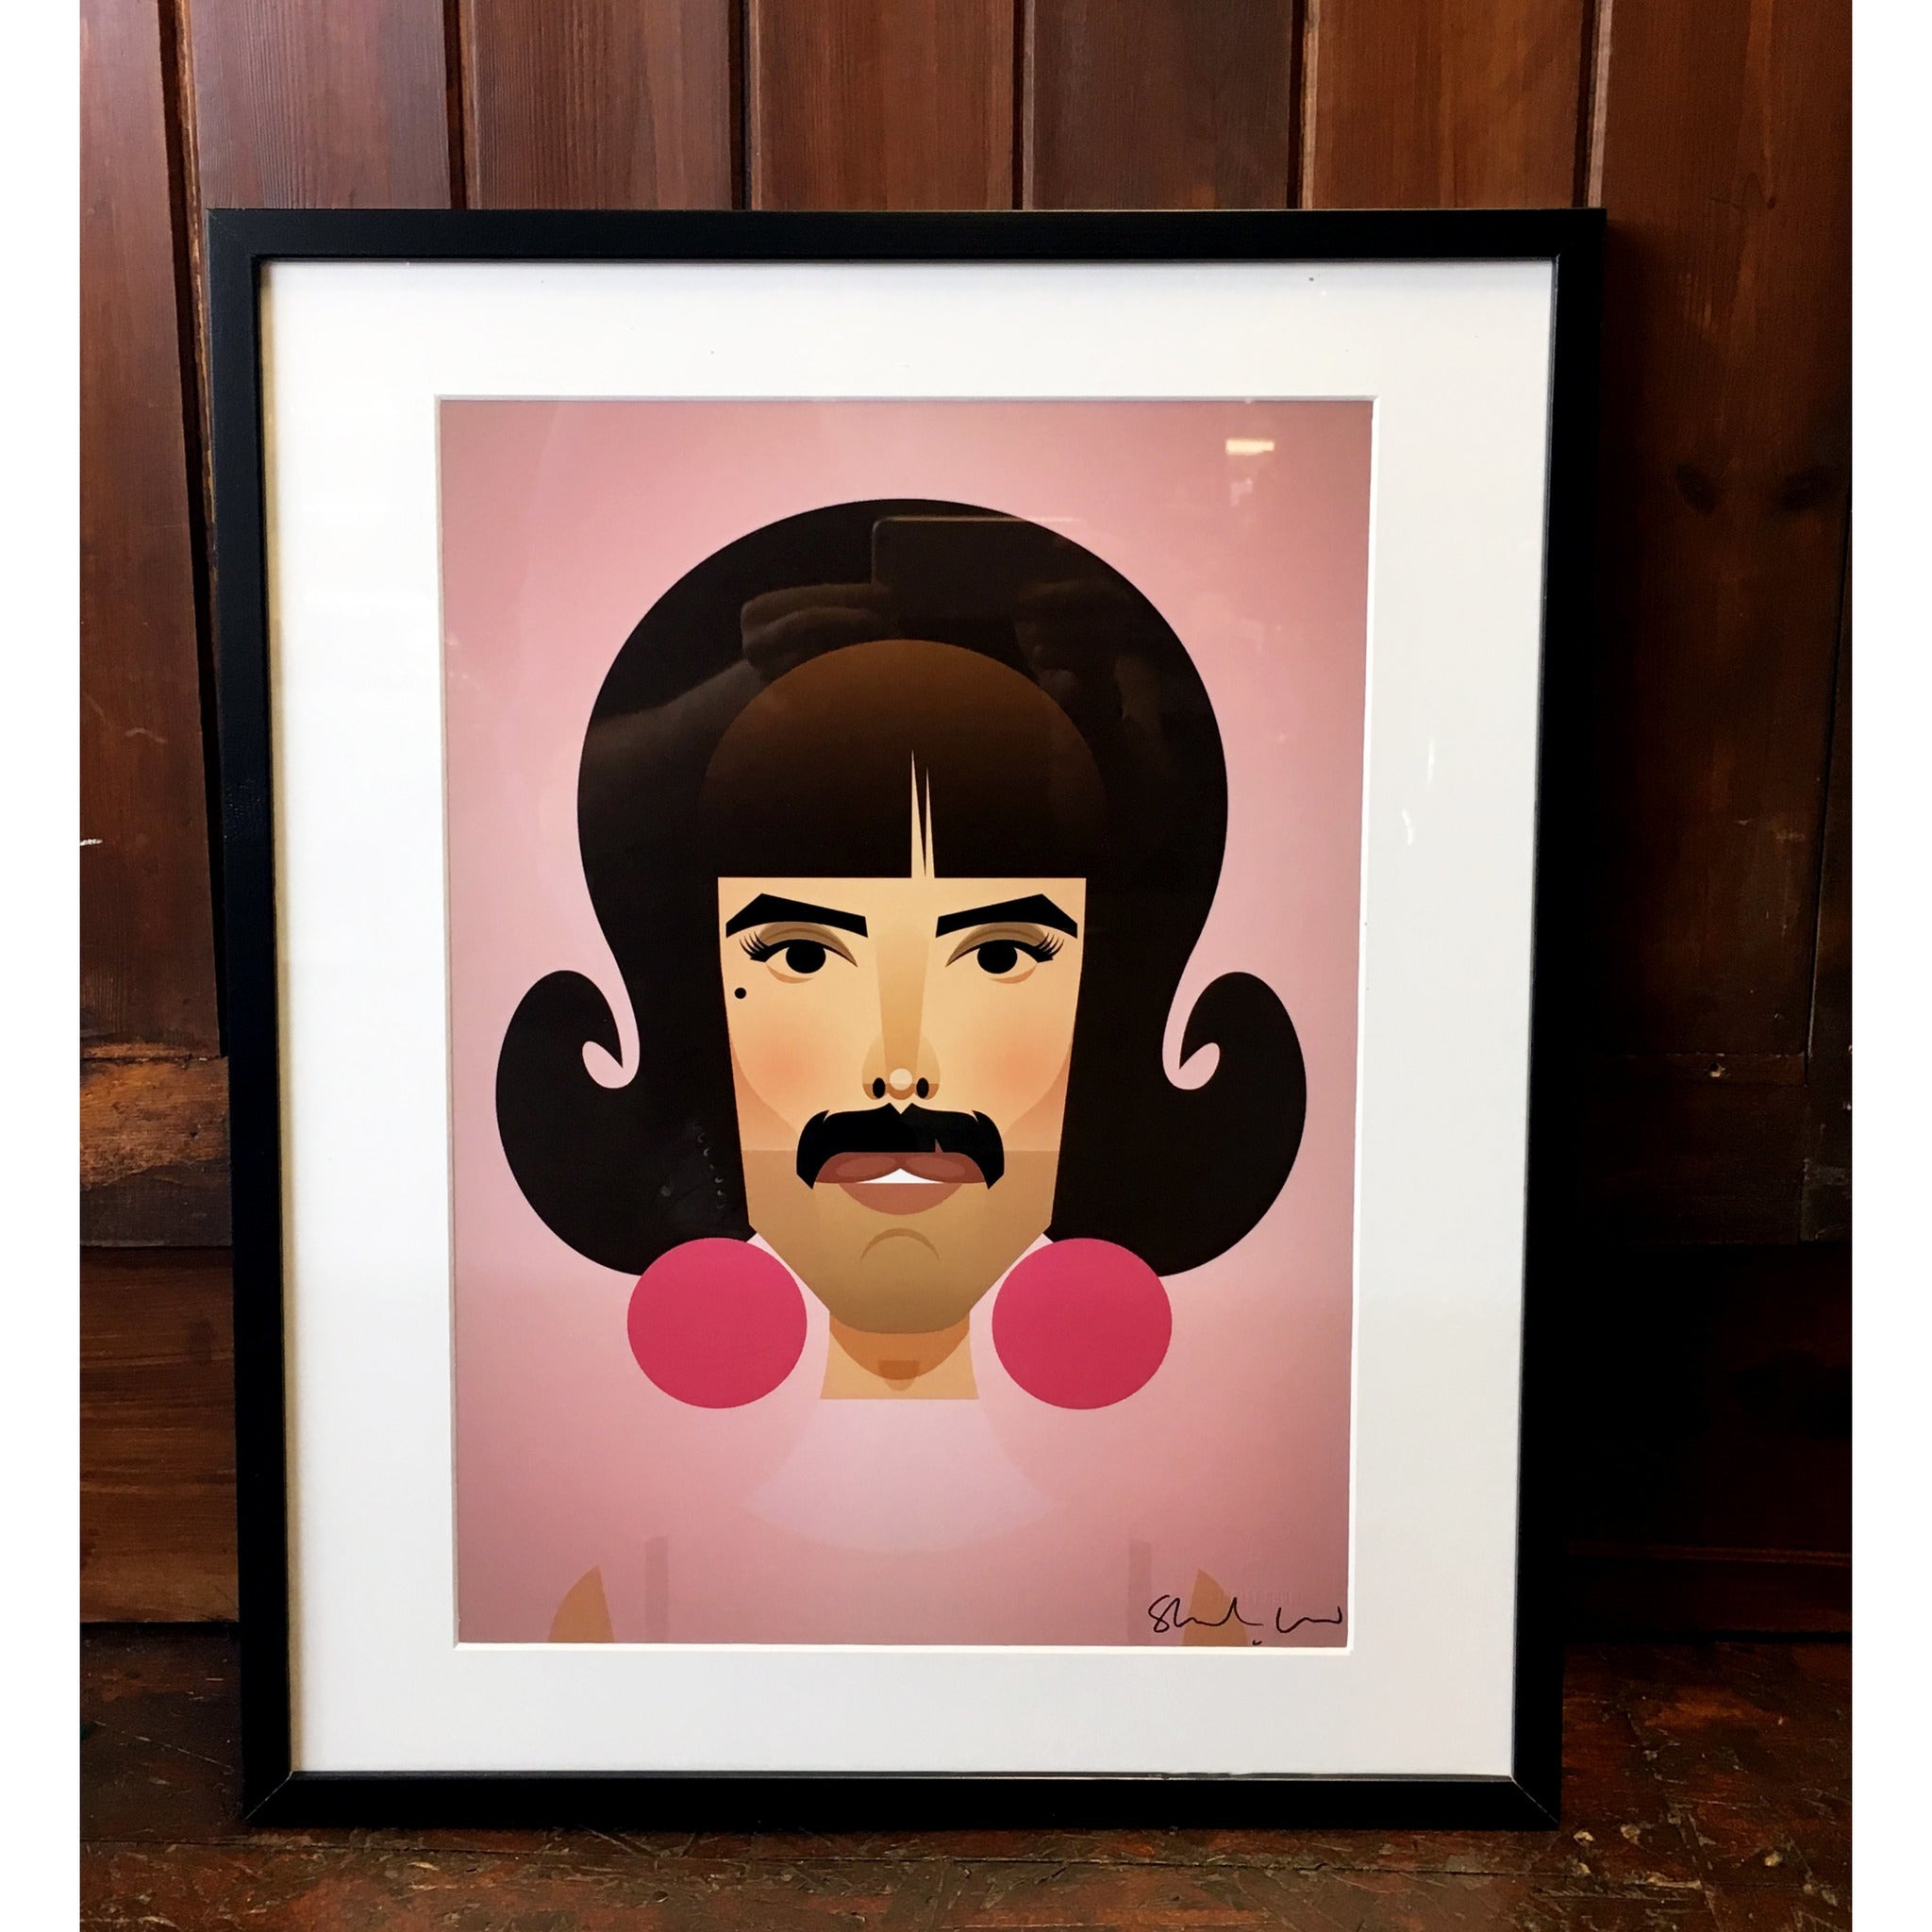 Freddie Mercury (Break free) by Stanley Chow - Signed and stamped fine art print - Egoiste Gallery - Art Gallery in Manchester City Centre